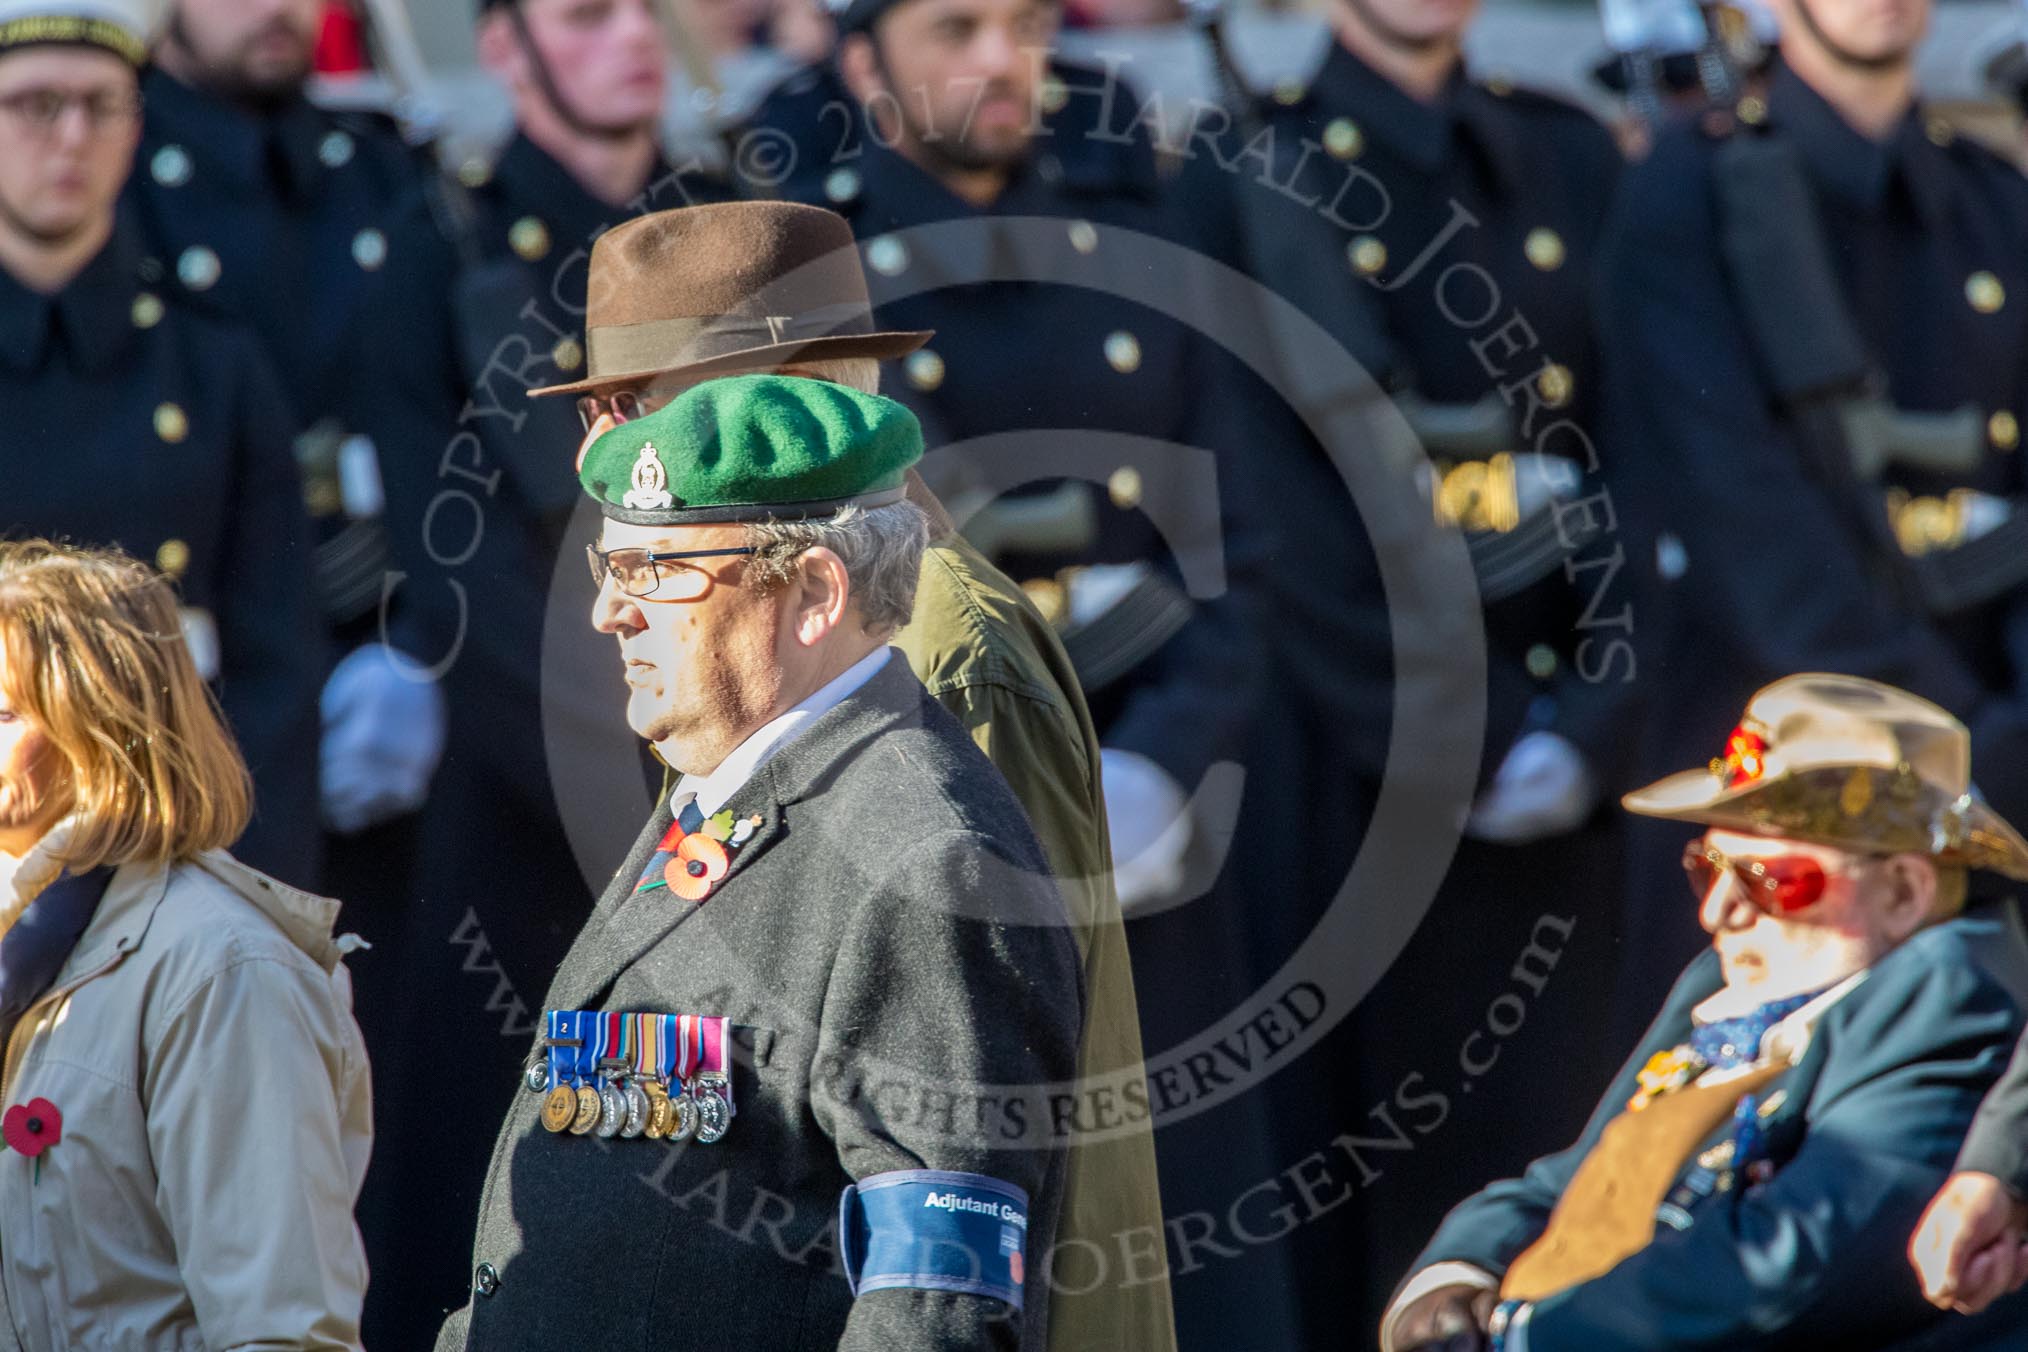 Adjutant General Corps (Group B34, 13 members) during the Royal British Legion March Past on Remembrance Sunday at the Cenotaph, Whitehall, Westminster, London, 11 November 2018, 12:13.